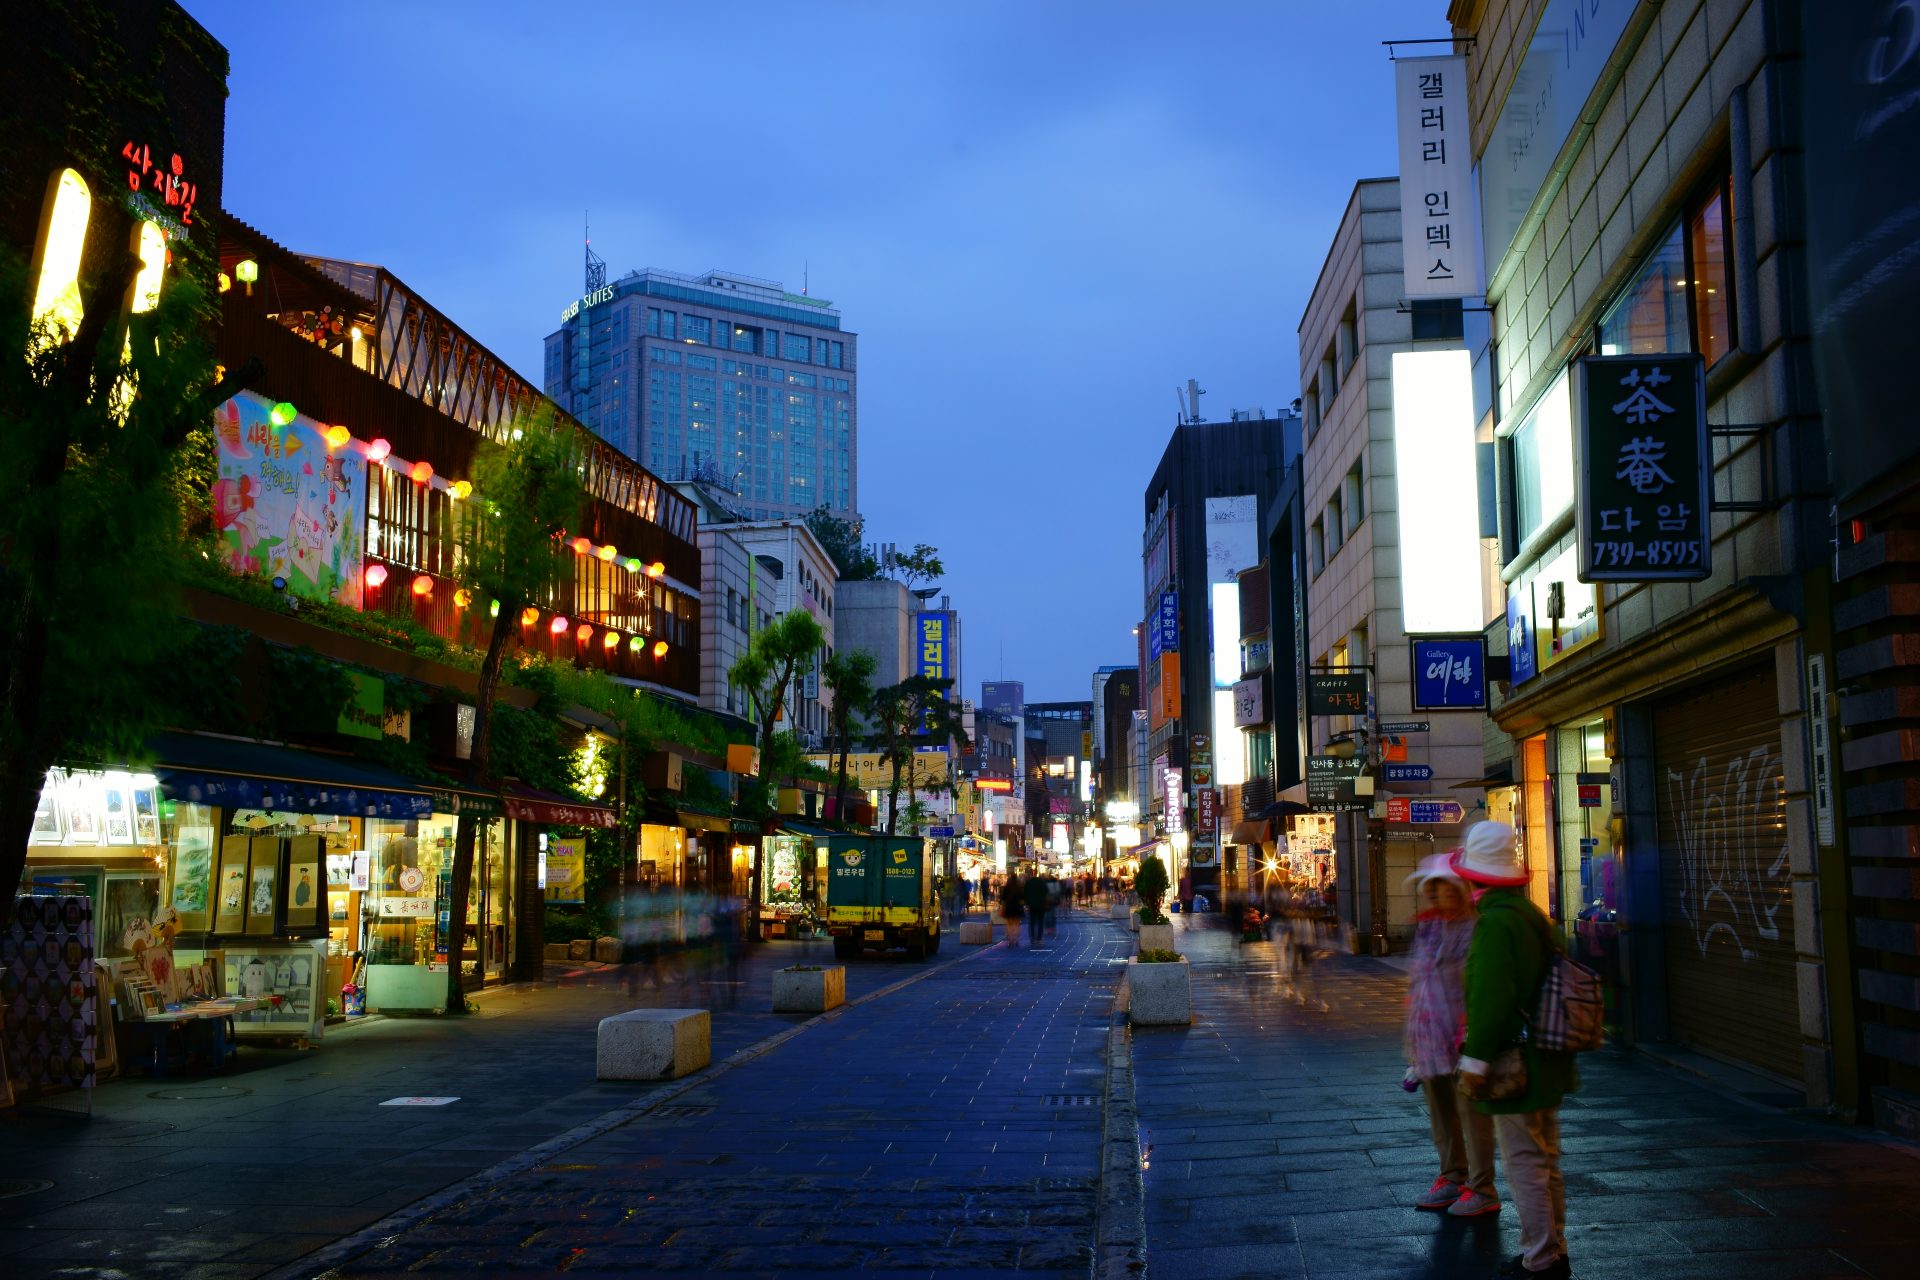 <p>In this area of Seoul, you can feel the atmosphere of 'good old Korea', with shops selling antiques, old art, ceramics, galleries, and traditional crafts. On Sundays, it becomes a pedestrian paradise with a flea market.</p>